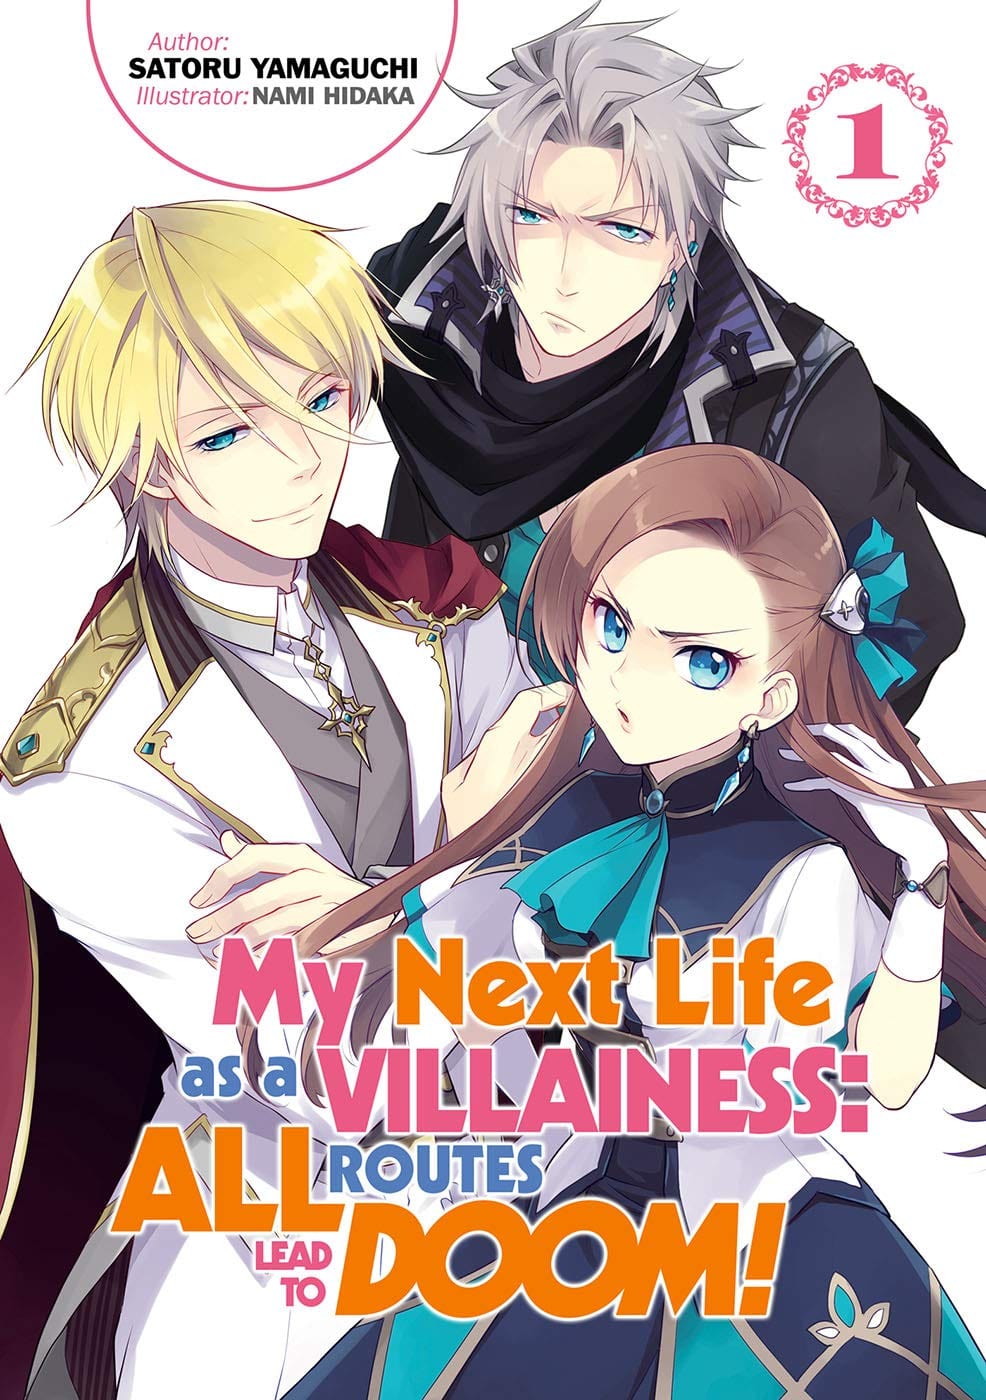 My Next Life as a Villainess: All Routes Lead to Doom! Vol. 1 - Third Eye